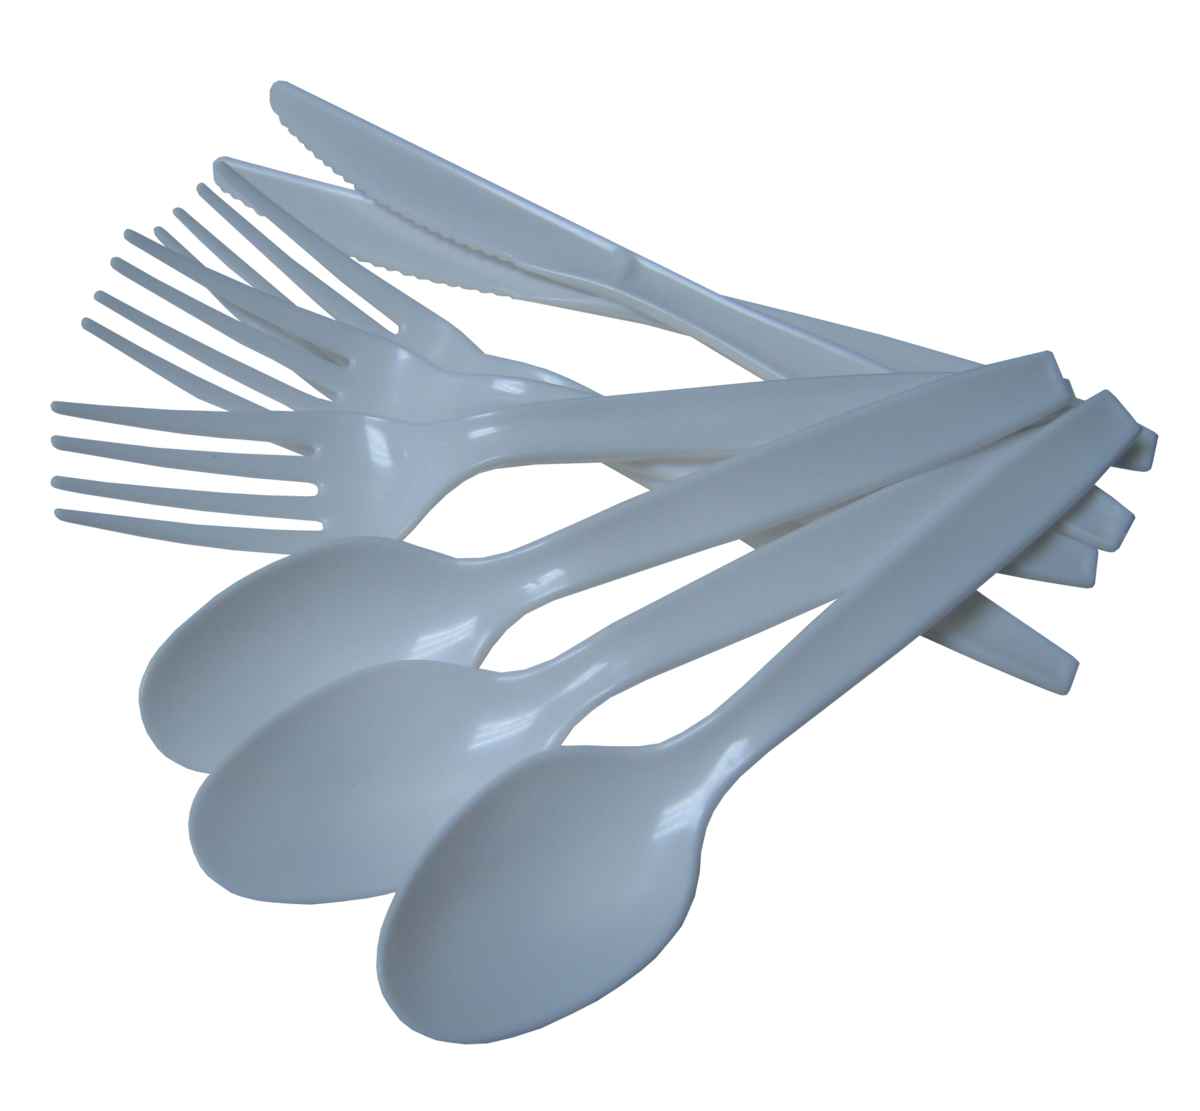 https://upload.wikimedia.org/wikipedia/commons/thumb/7/73/Plasticware_-_isolated.png/1200px-Plasticware_-_isolated.png